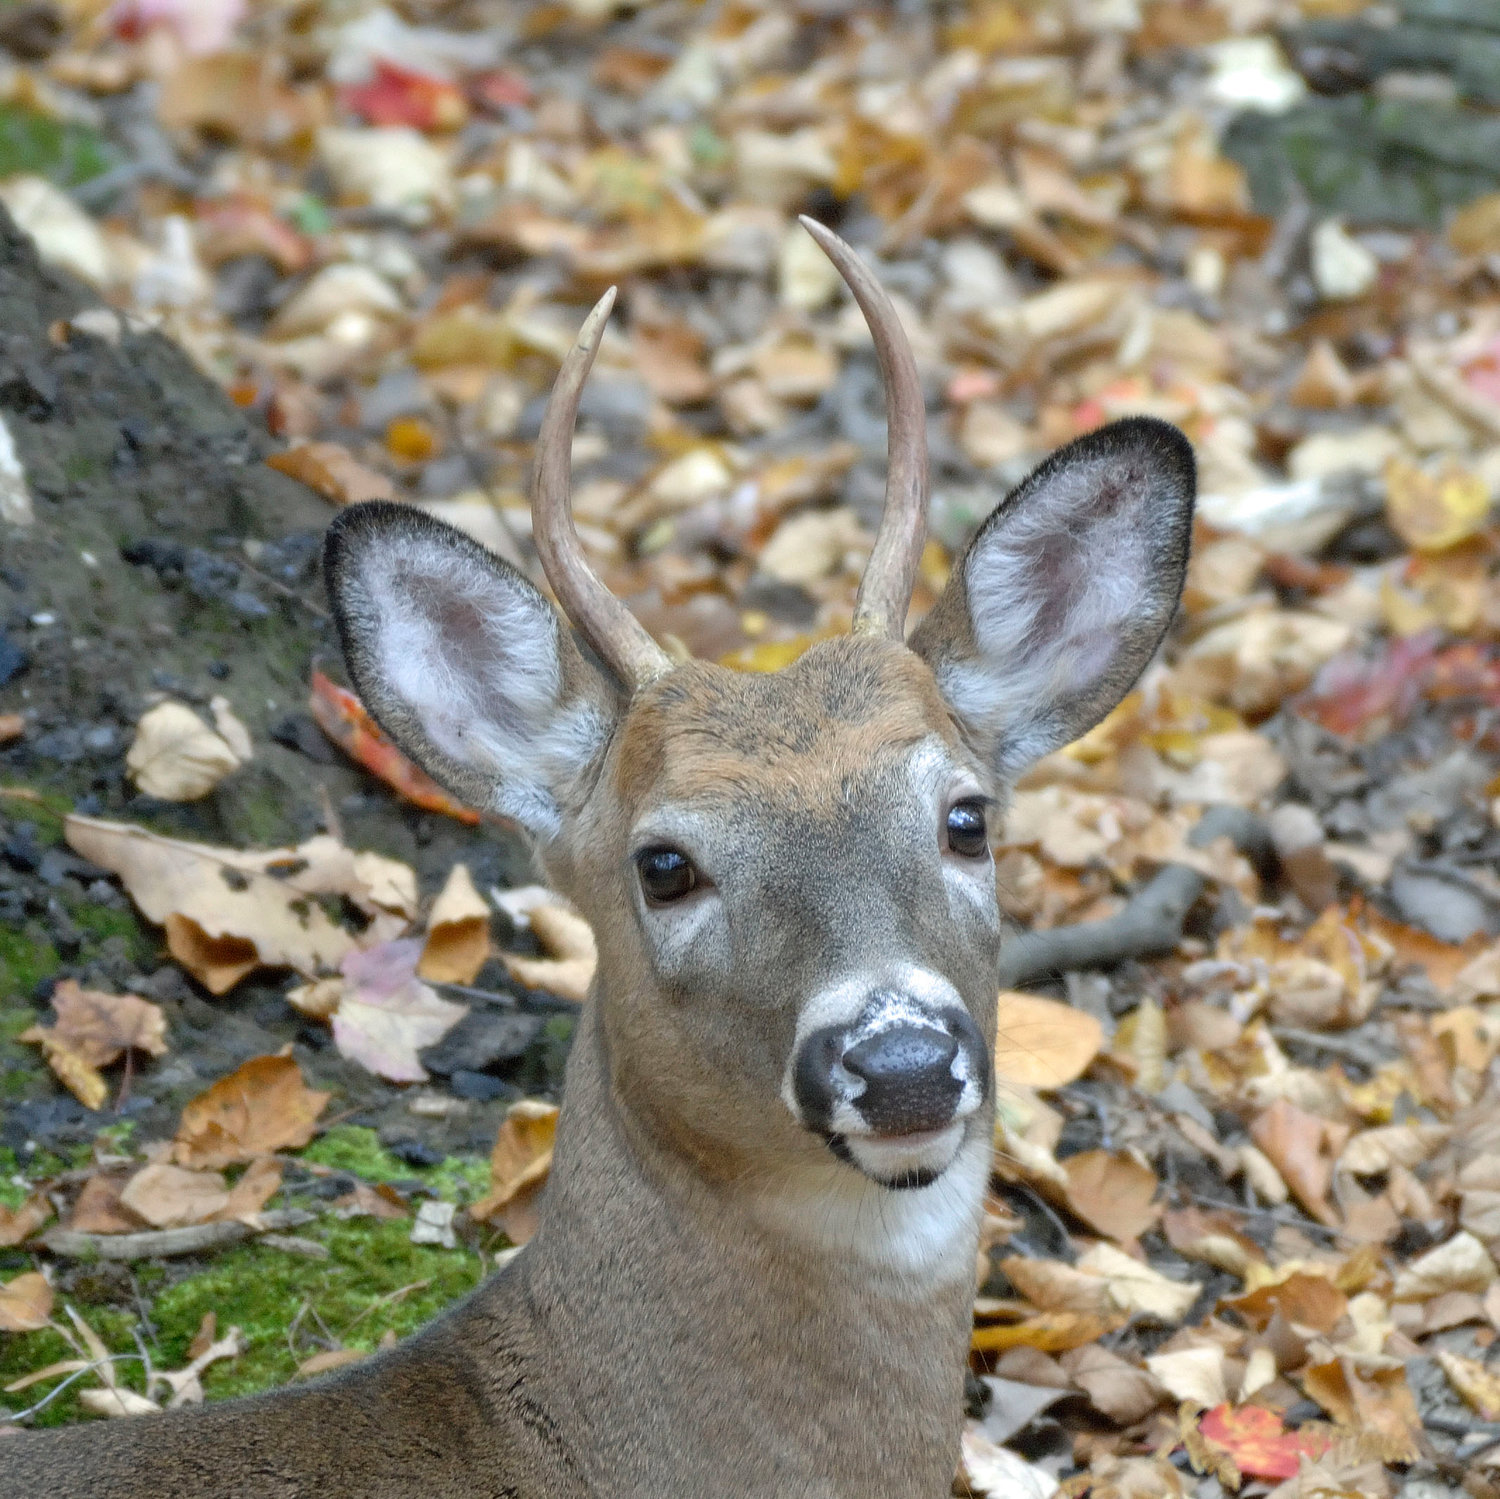 A male whitetail deer in its winter coat: a dark-brown coat of fur. The fur consists of longer, thicker hairs called guard hairs, with an undercoat beneath. This darker hair also absorbs more warmth from sunlight, helping to fight the harsh winter cold.